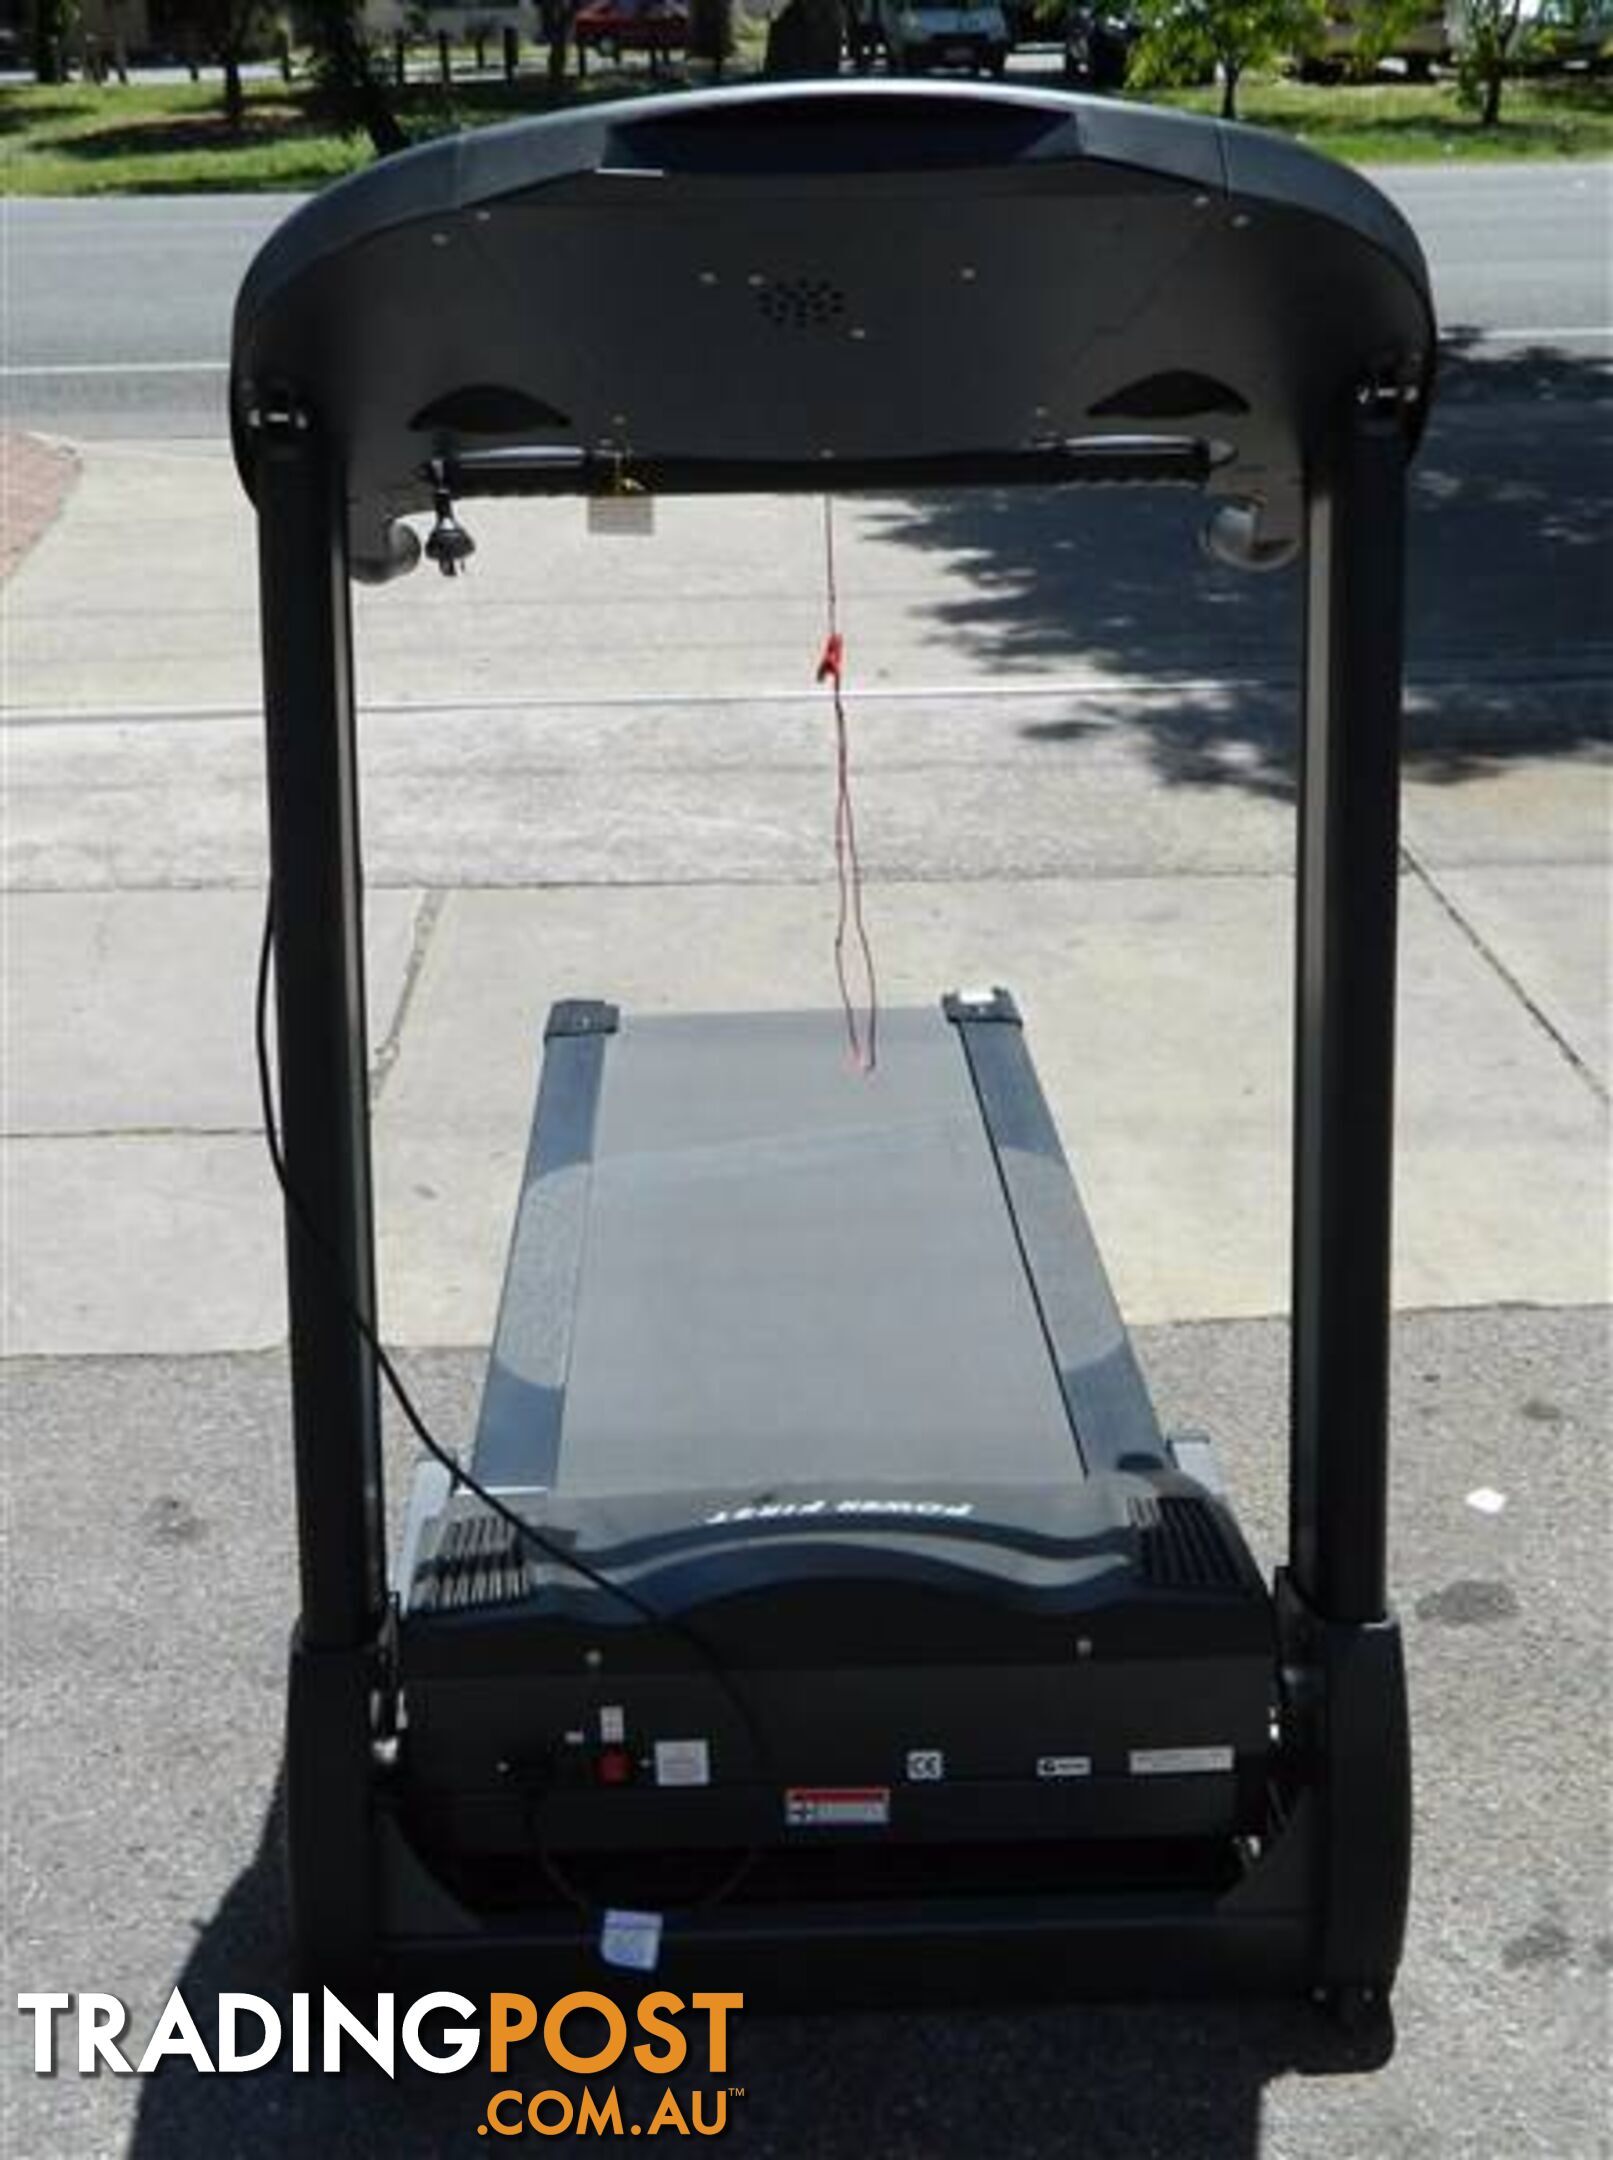 Power First P104 Treadmill , Max 22 Km/h , Excellent condition !